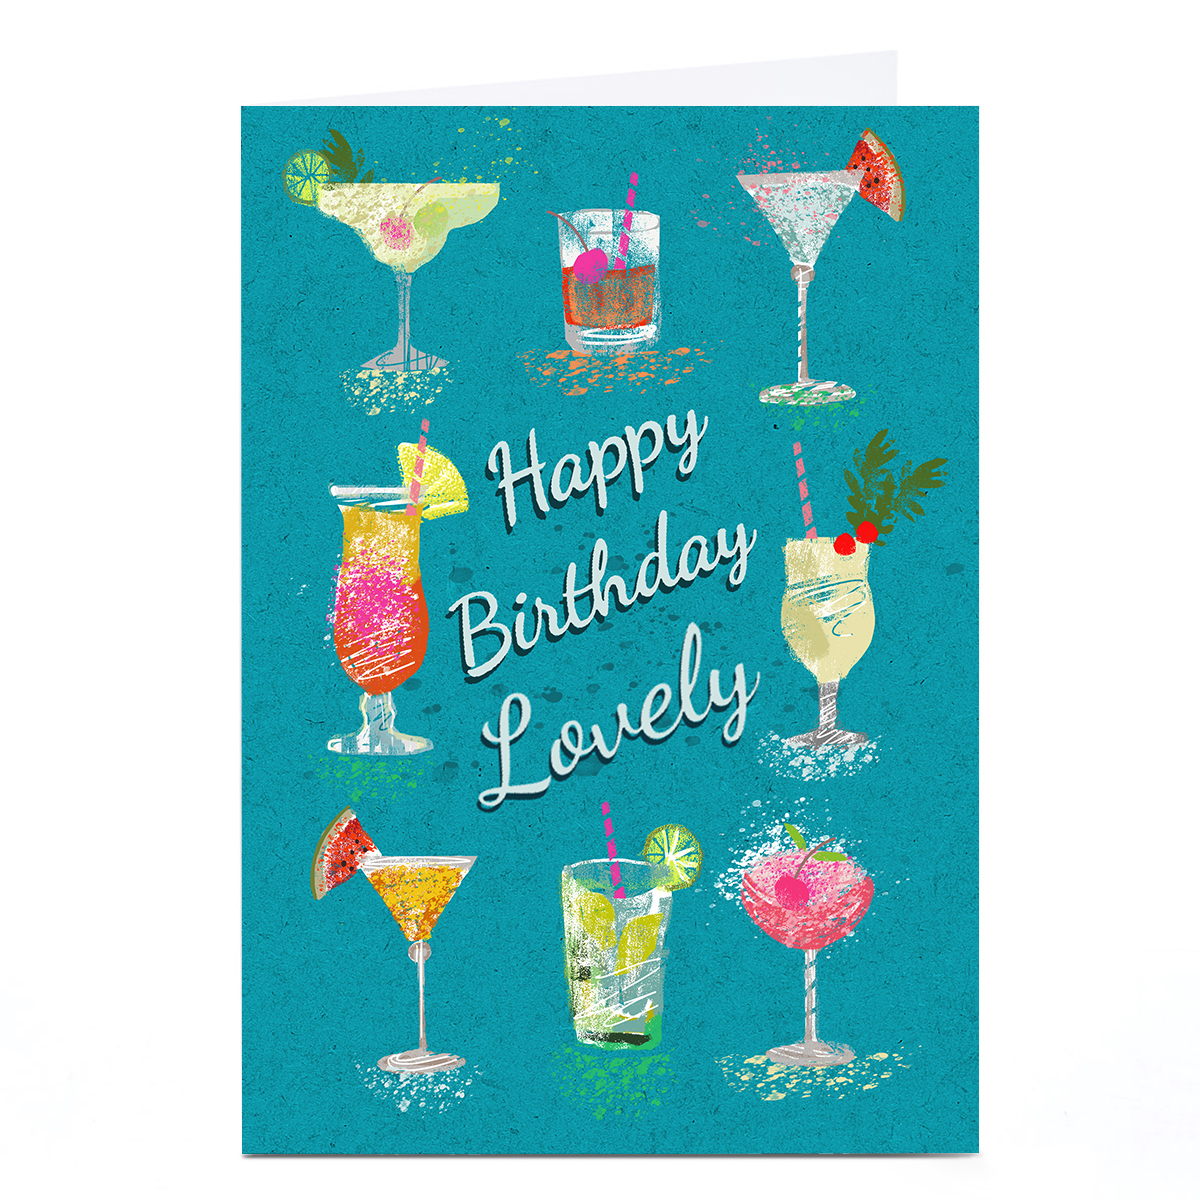 Personalised Lindsay Loves To Draw Birthday Card - Lovely Cocktails